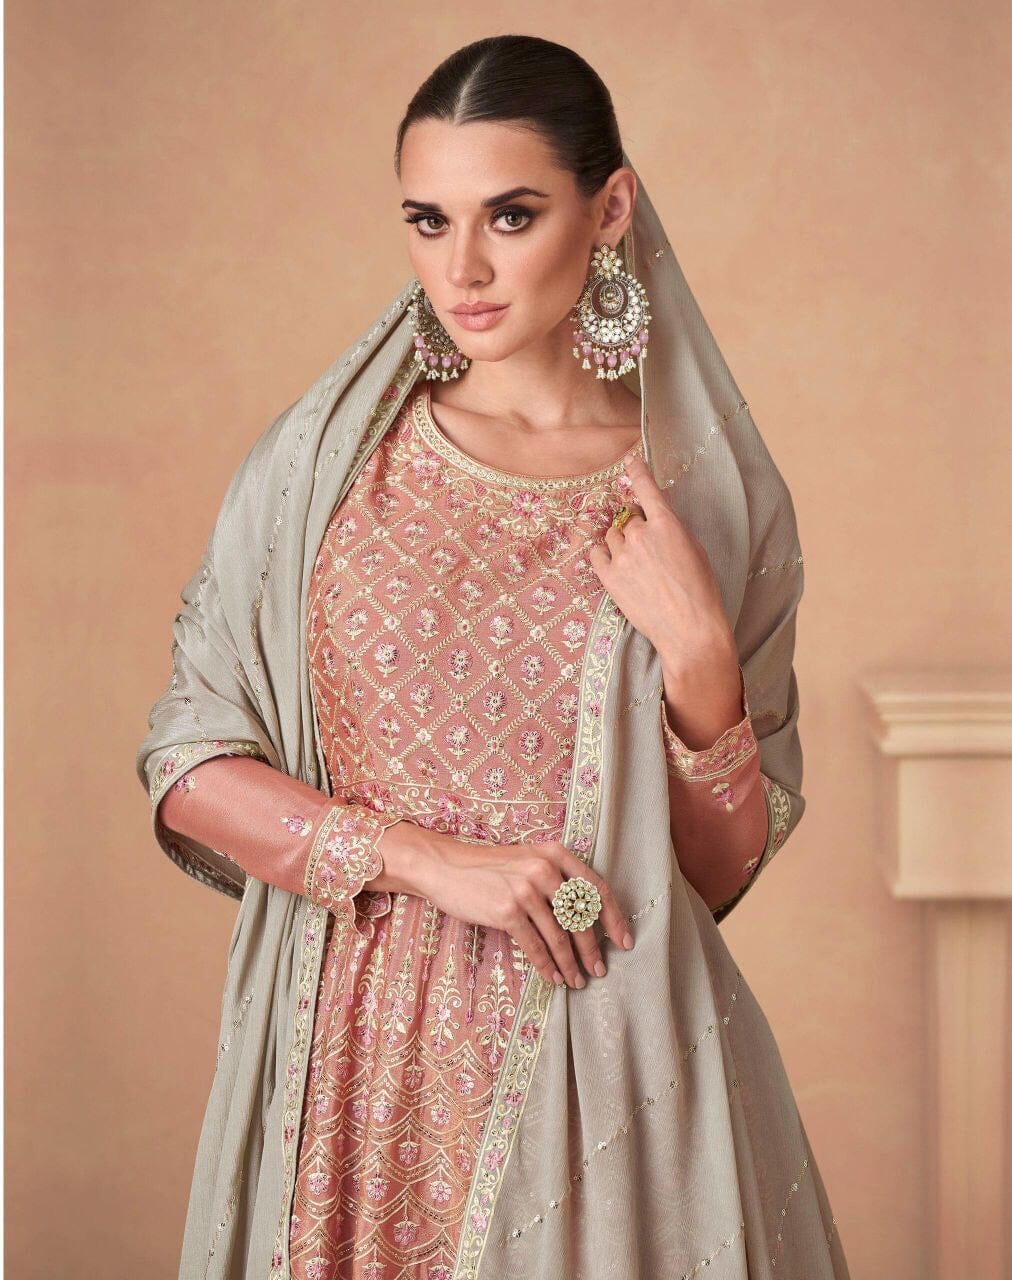 1151 Designer Chinnon Peplum Top and Plazzo Suit Ready Made Designer Suits Shopin Di Apparels 